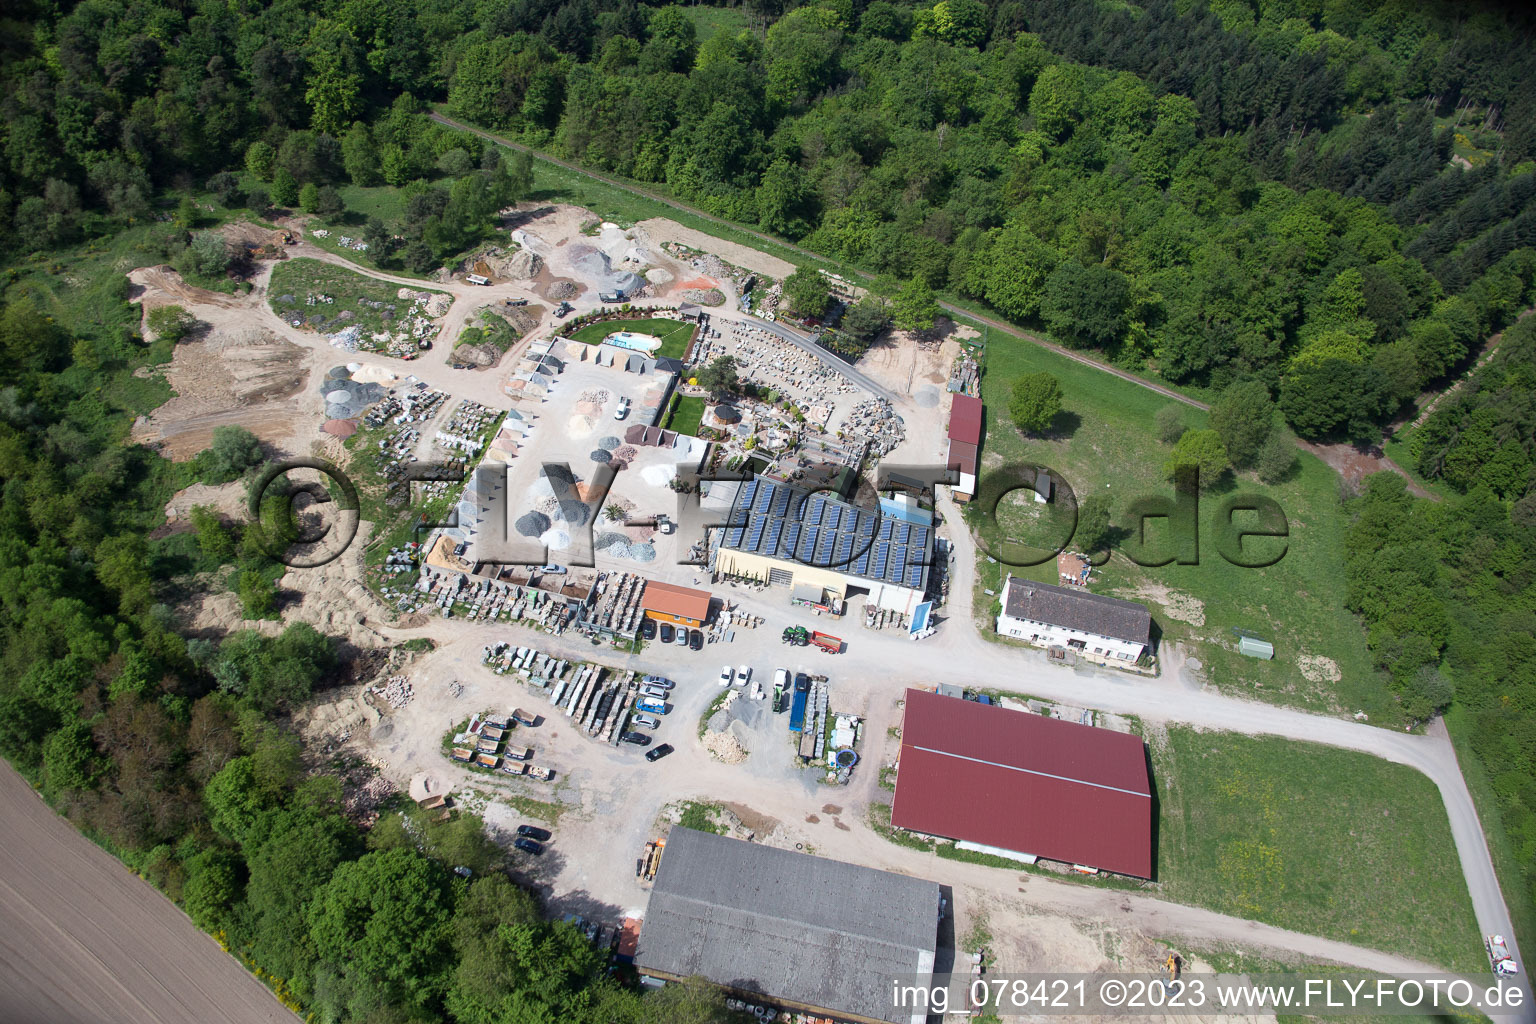 Bird's eye view of Palatinum landscape and garden design in Hagenbach in the state Rhineland-Palatinate, Germany